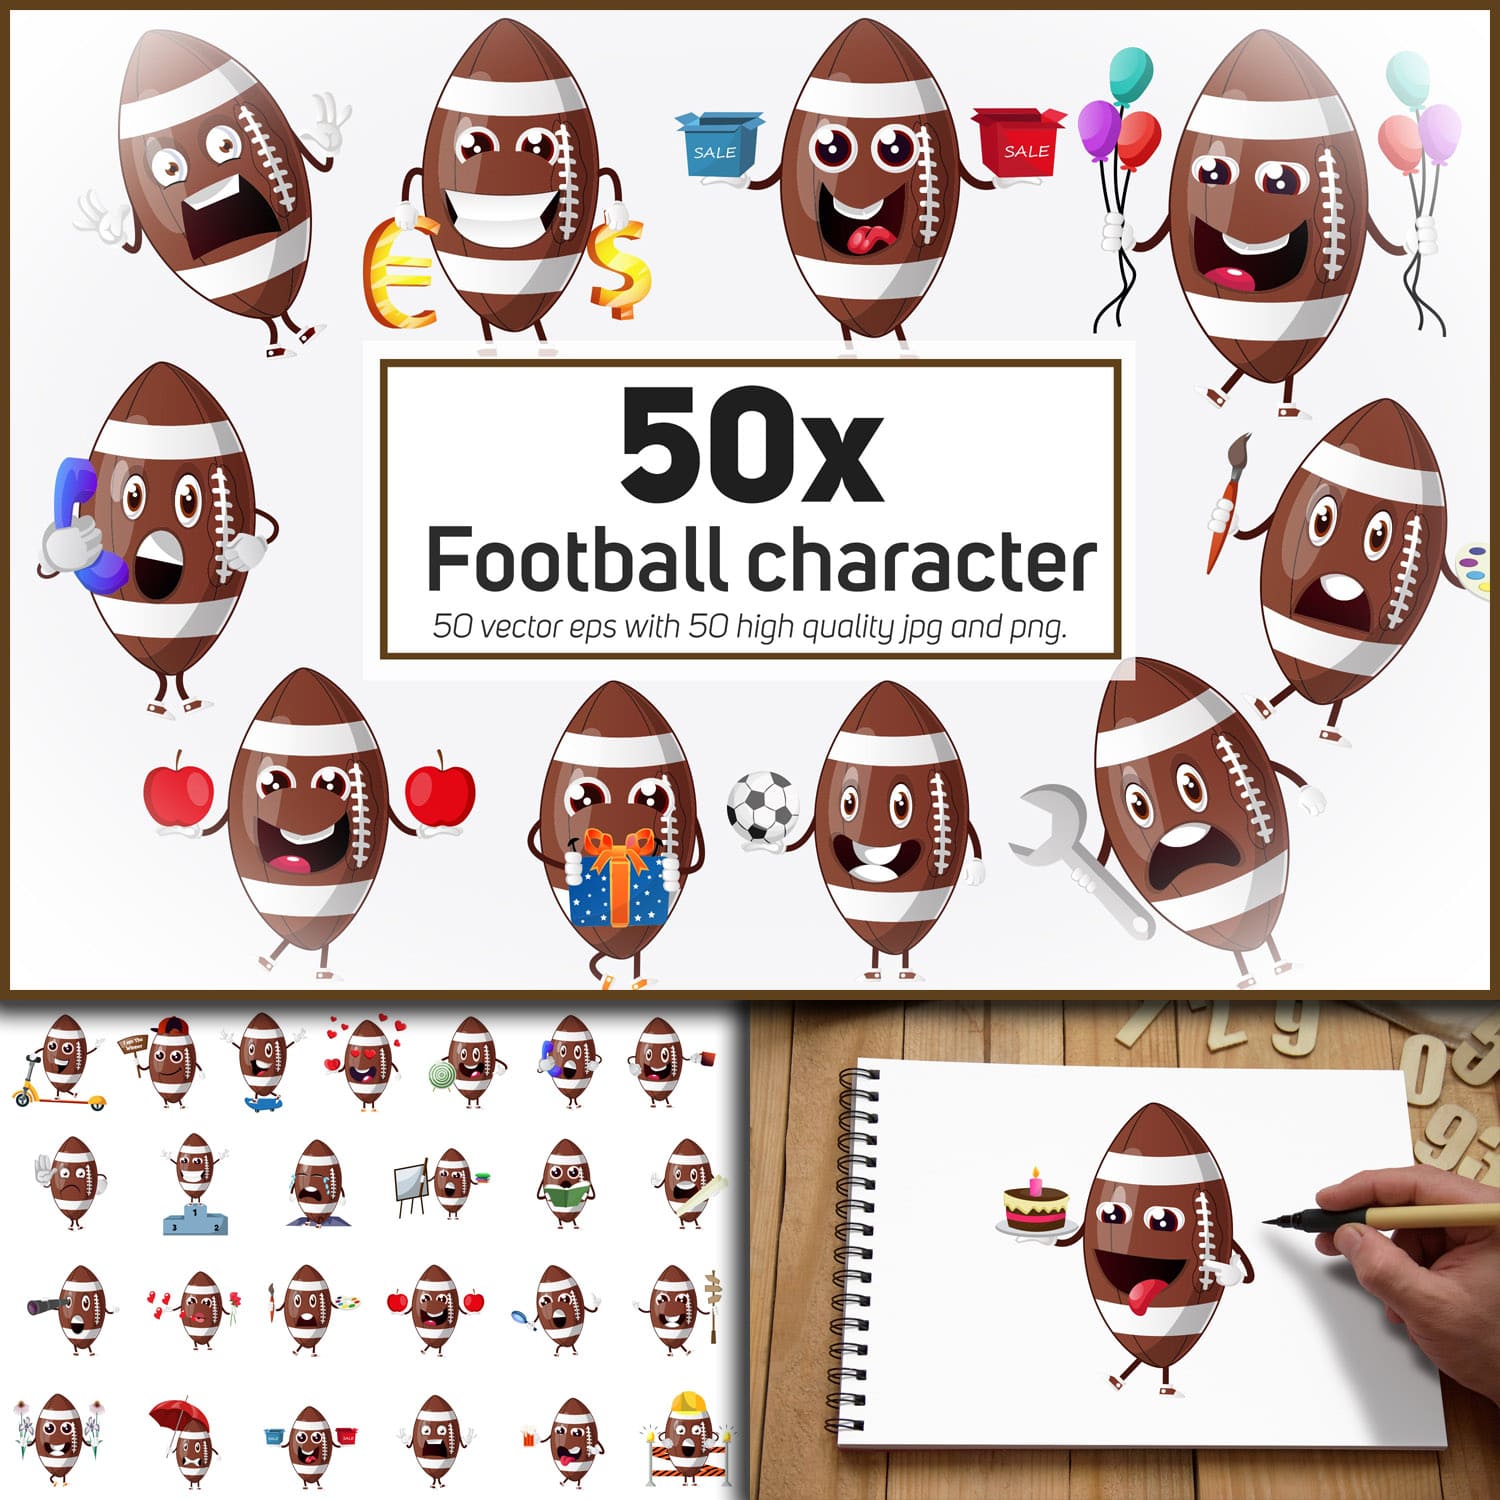 Prints of 50x football mascot or character in different situ.